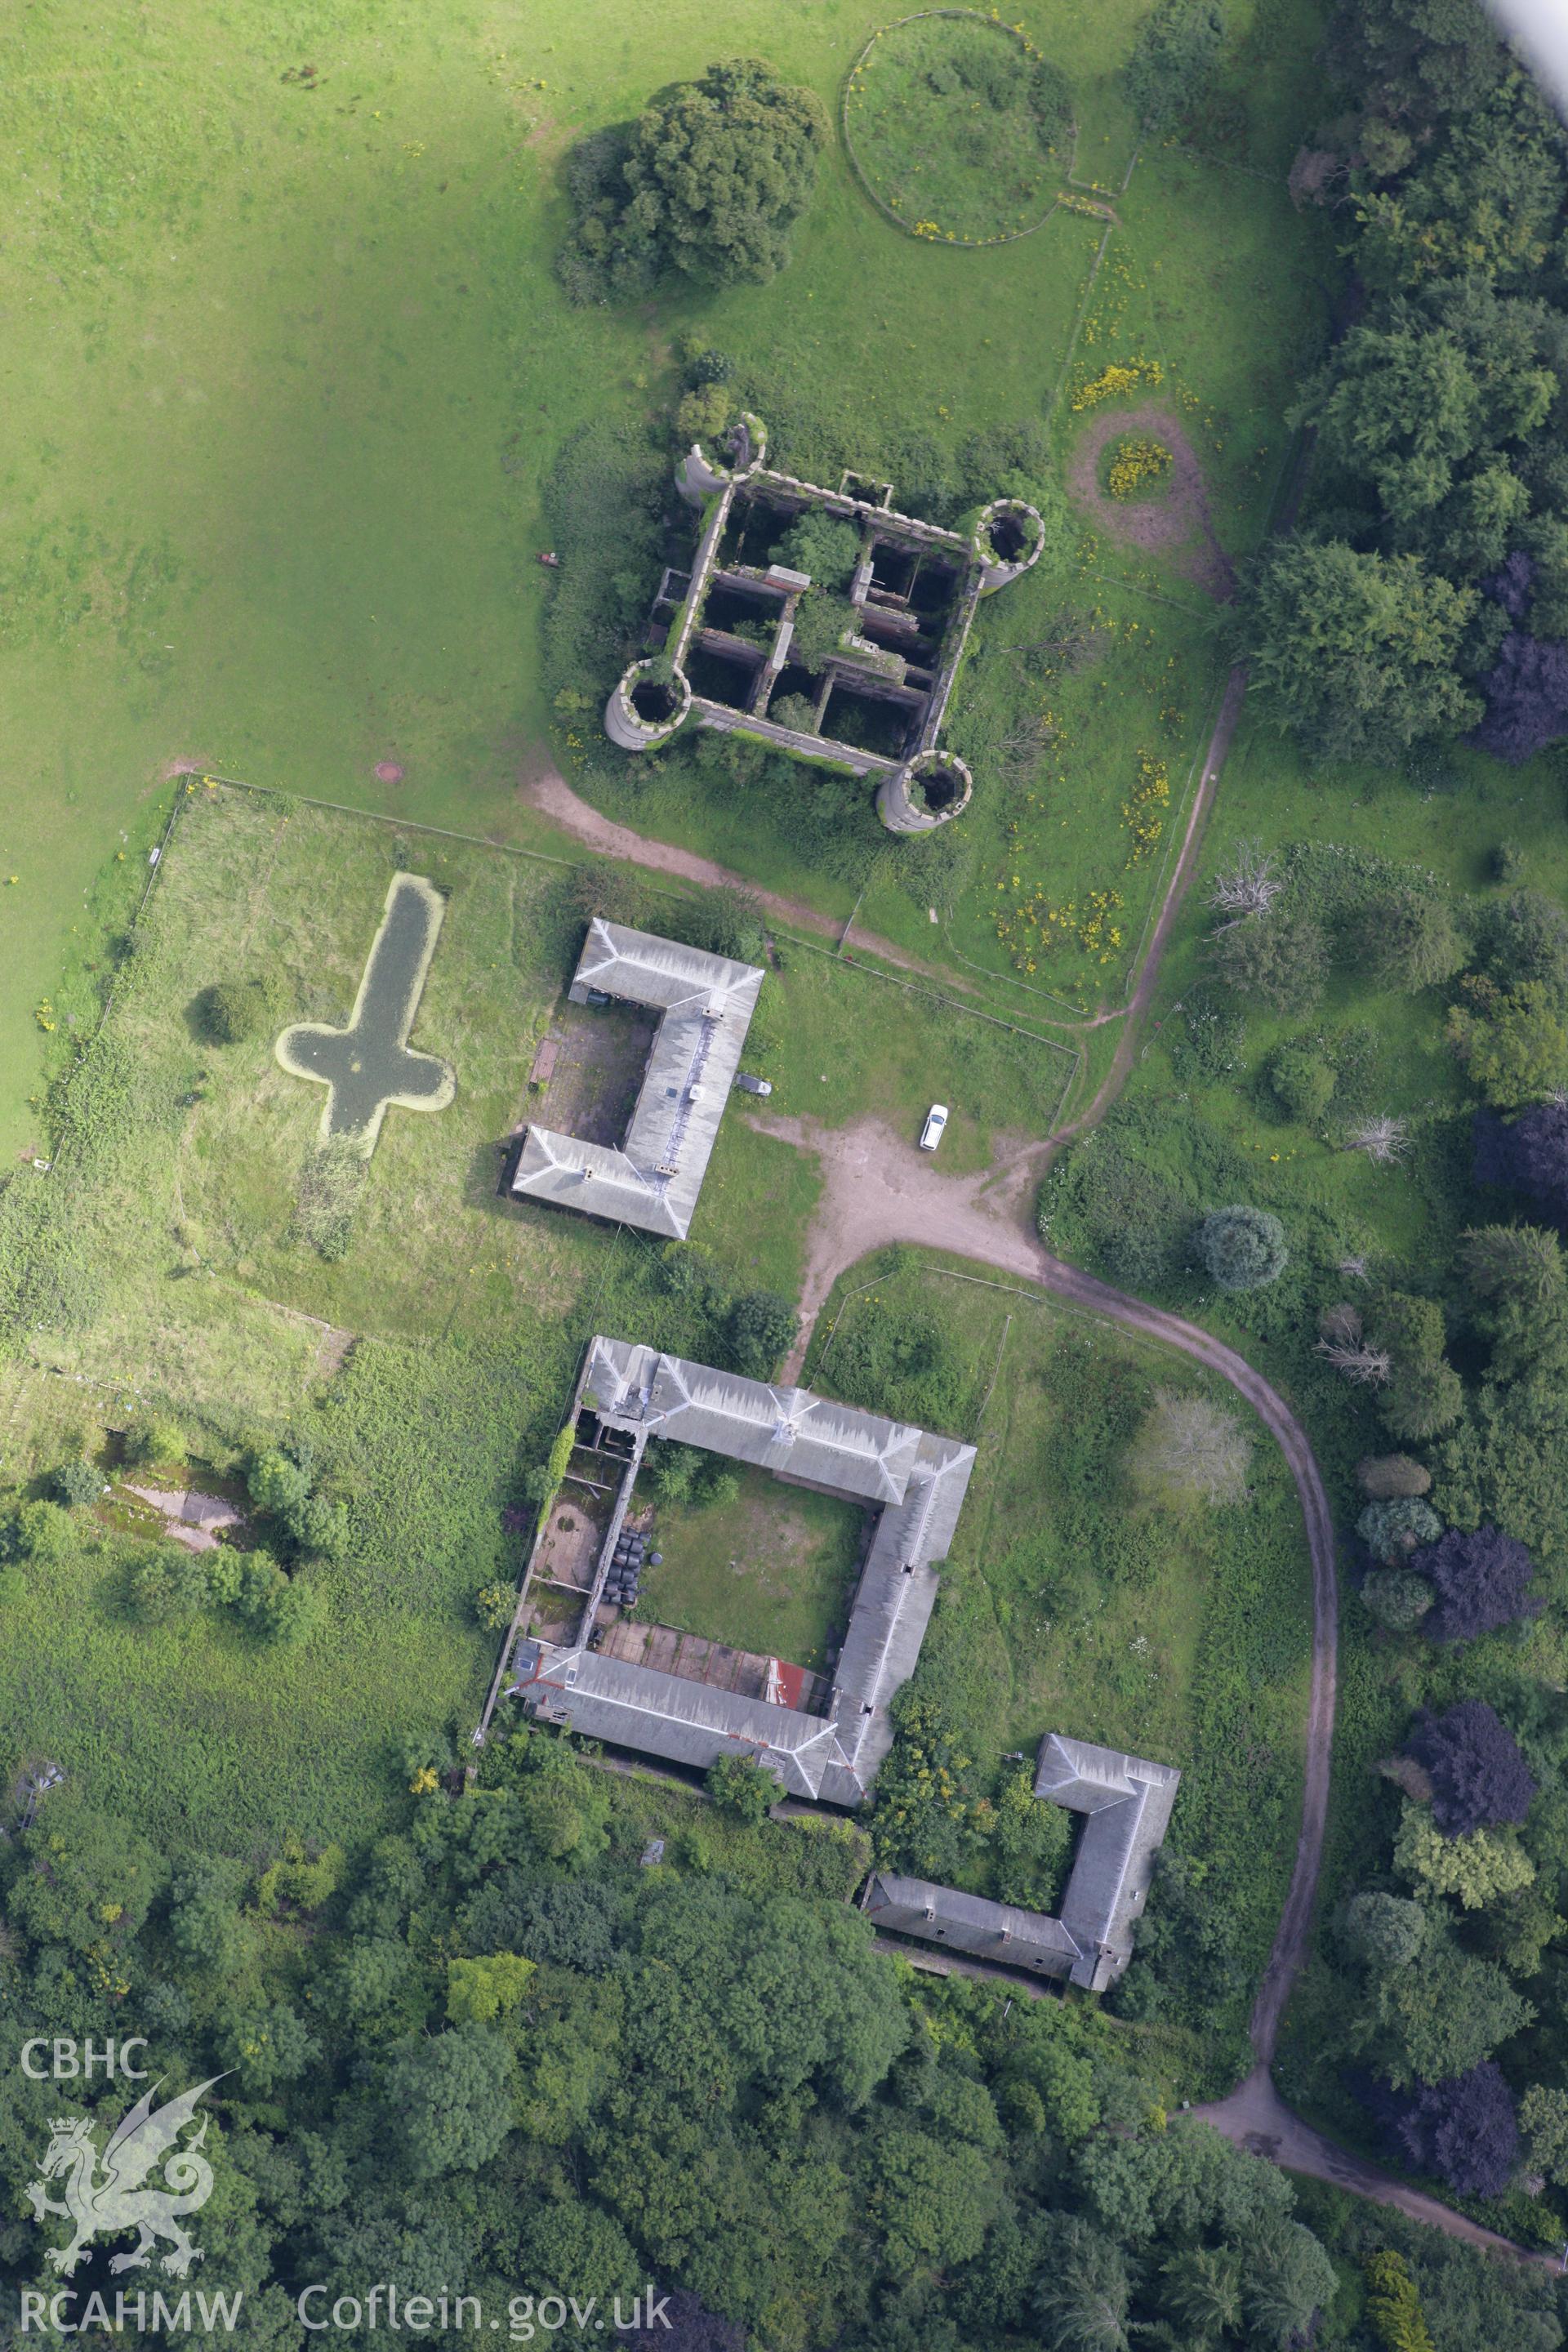 RCAHMW colour oblique aerial photograph of Ruperra Castle. Taken on 30 July 2007 by Toby Driver